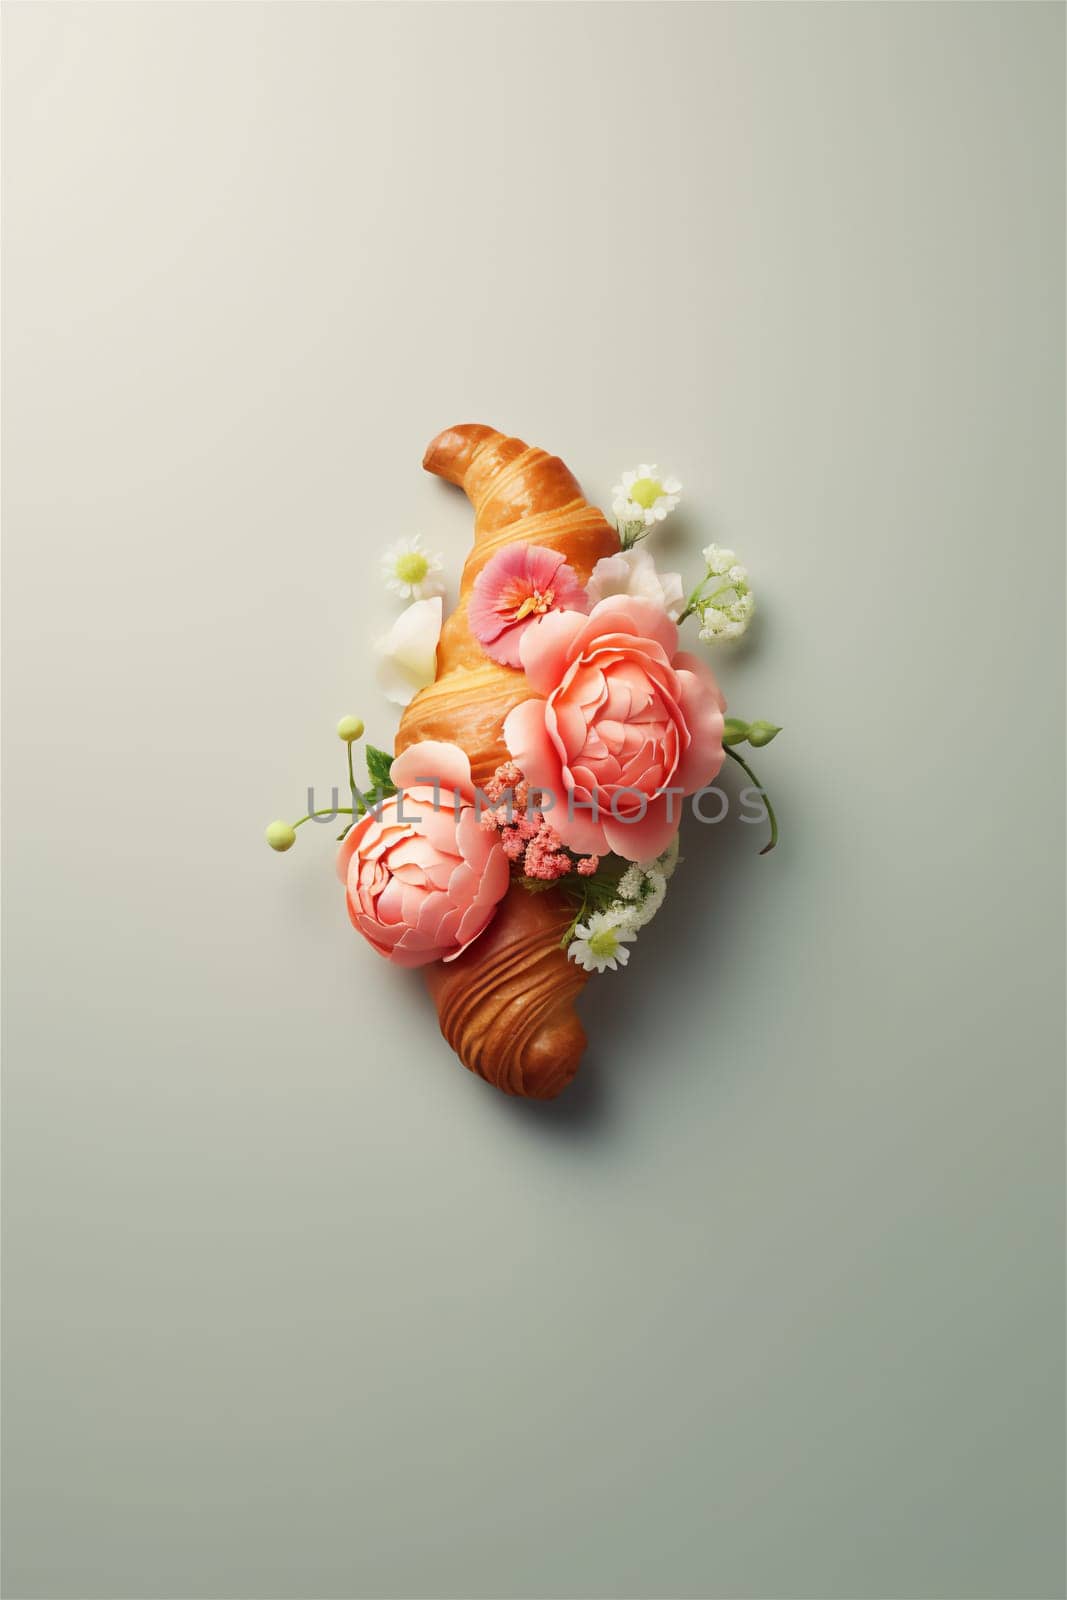 Delicious croissant with spring flowers on gray background. French traditional food concept with copy space. View from above